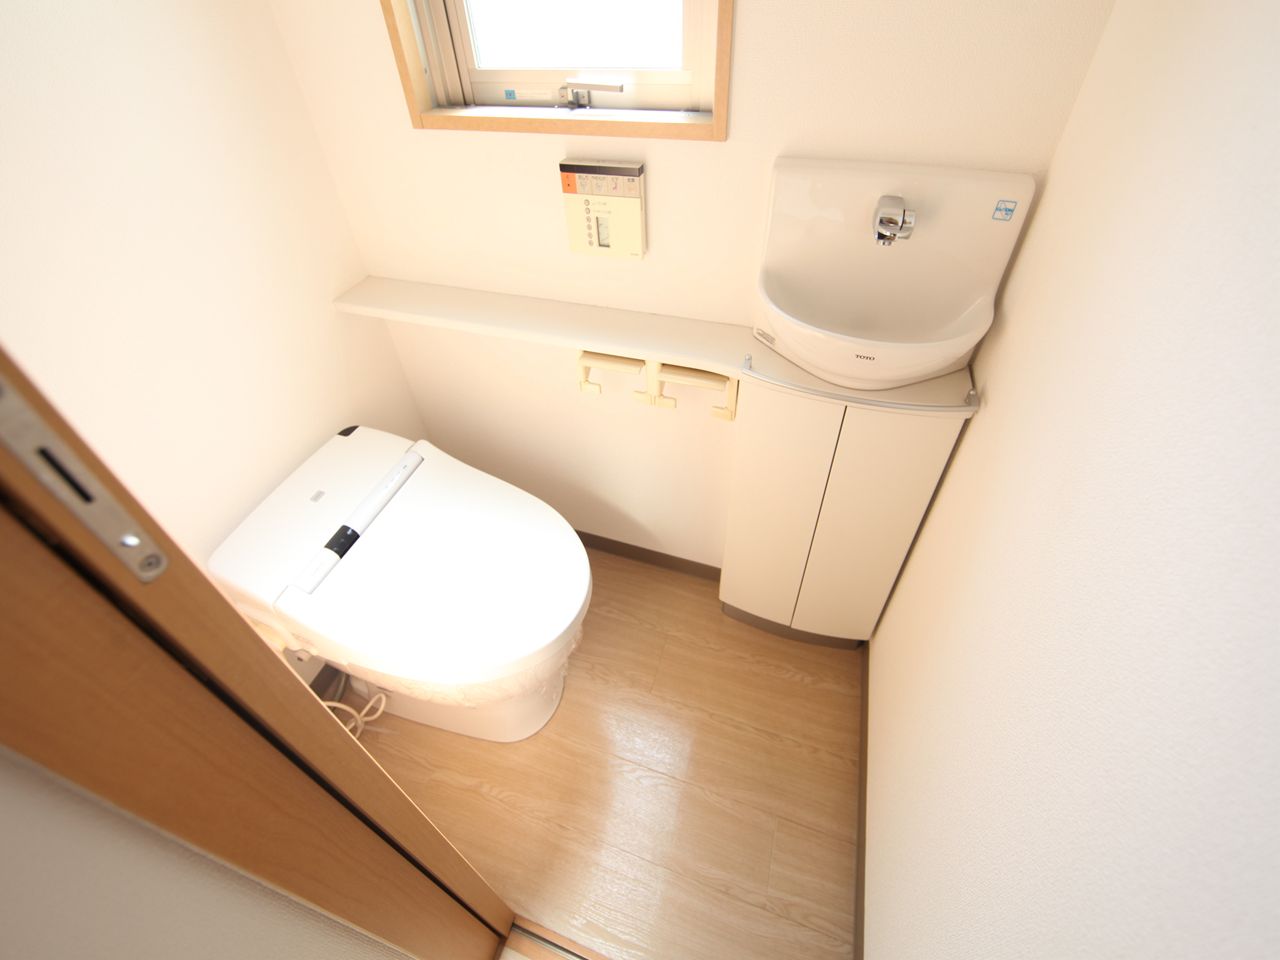 Toilet. Toilet (with warm water cleaning toilet seat) With windows (ventilation good)